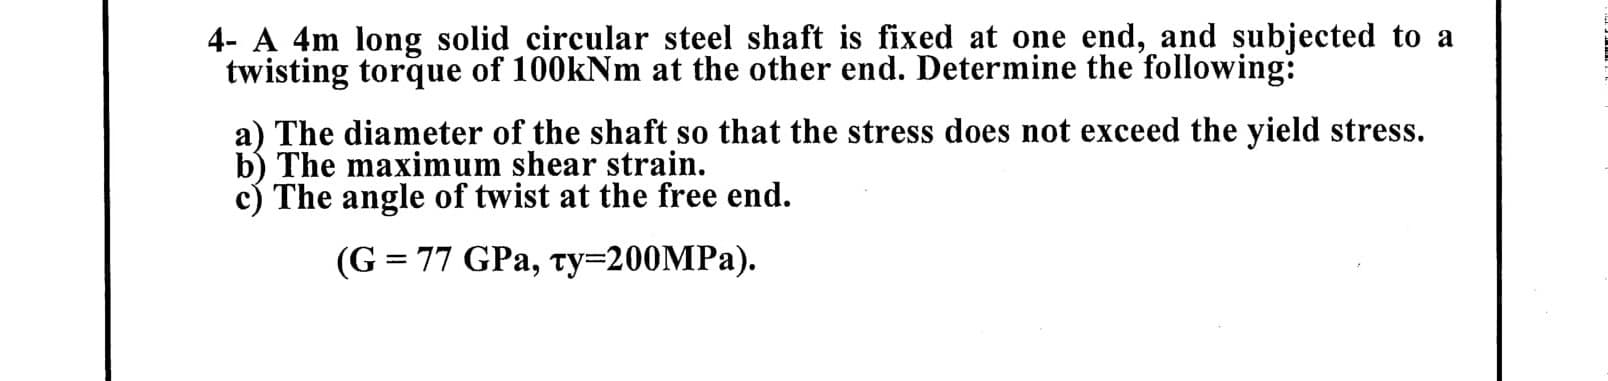 4- A 4m long solid circular steel shaft is fixed at one end, and subjected to a
twisting torque of 100kNm at the other end. Determine the following:
a) The diameter of the shaft so that the stress does not exceed the yield stress.
b) The maximum shear strain.
c) The angle of twist at the free end.
(G = 77 GPa, ty=200MPA).
